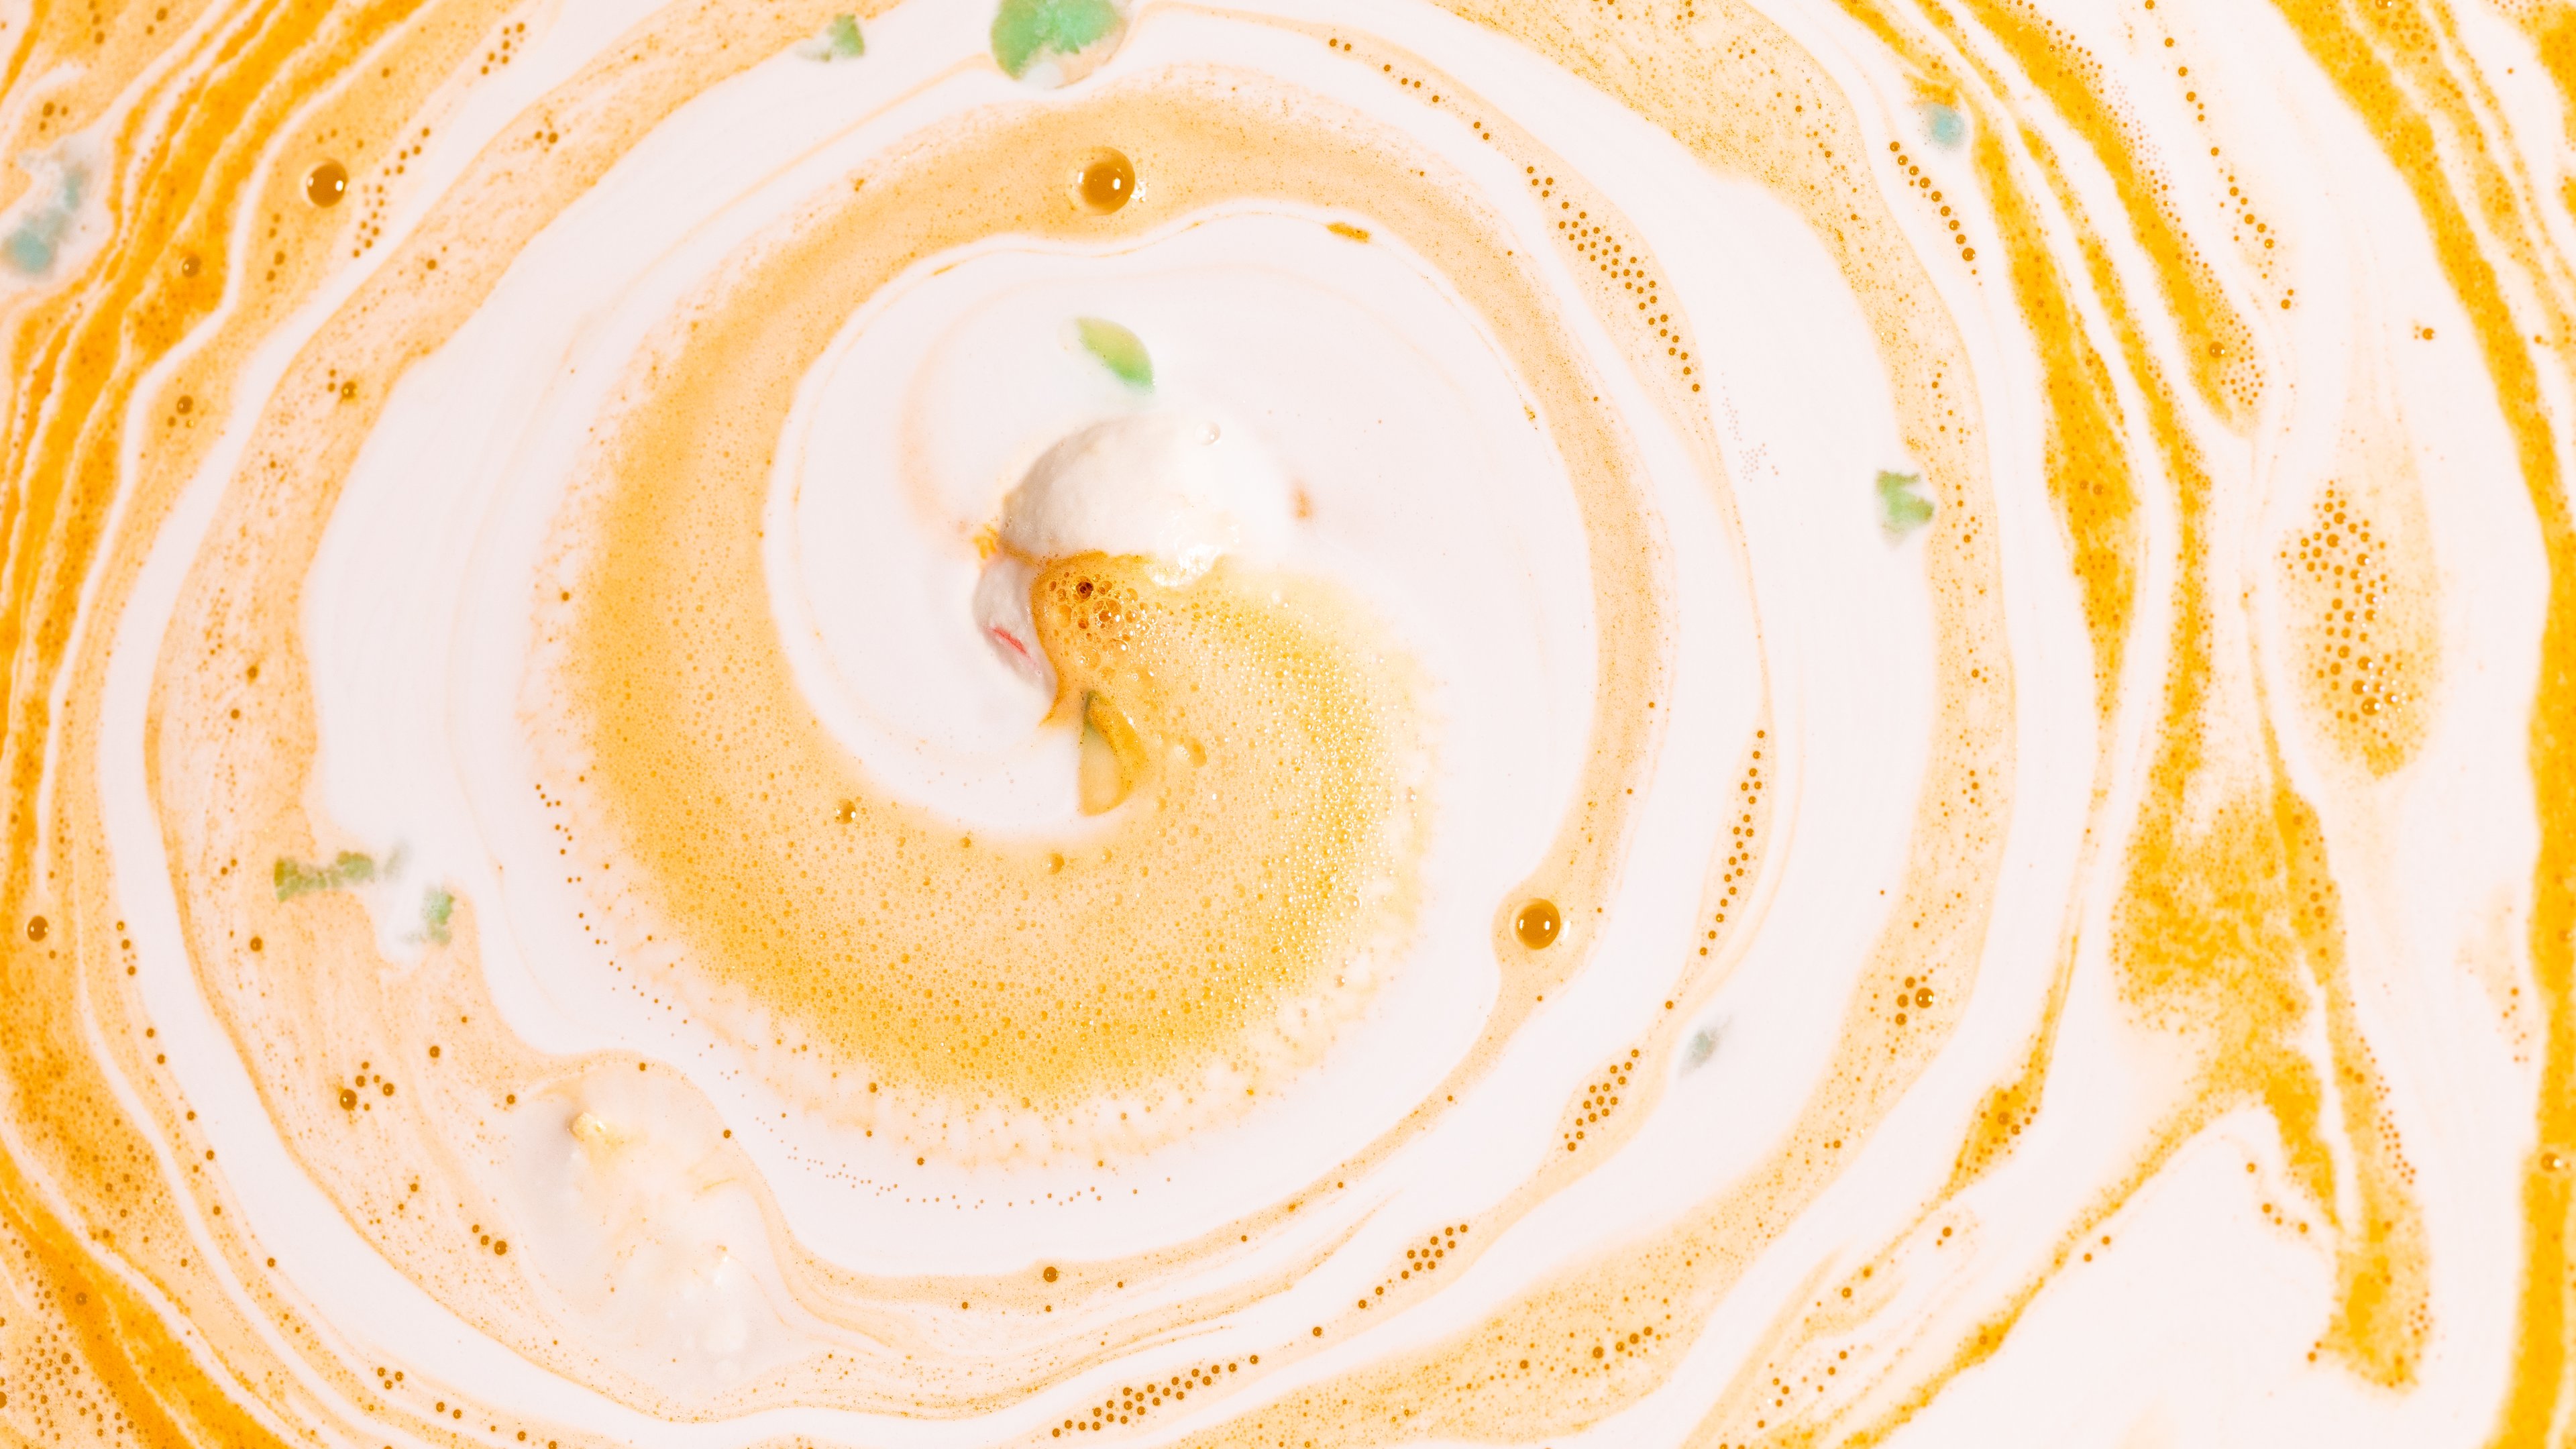 Dragon's Egg Bath bomb sits fizzling in a refreshing swirl of orange and white, with hints of green.